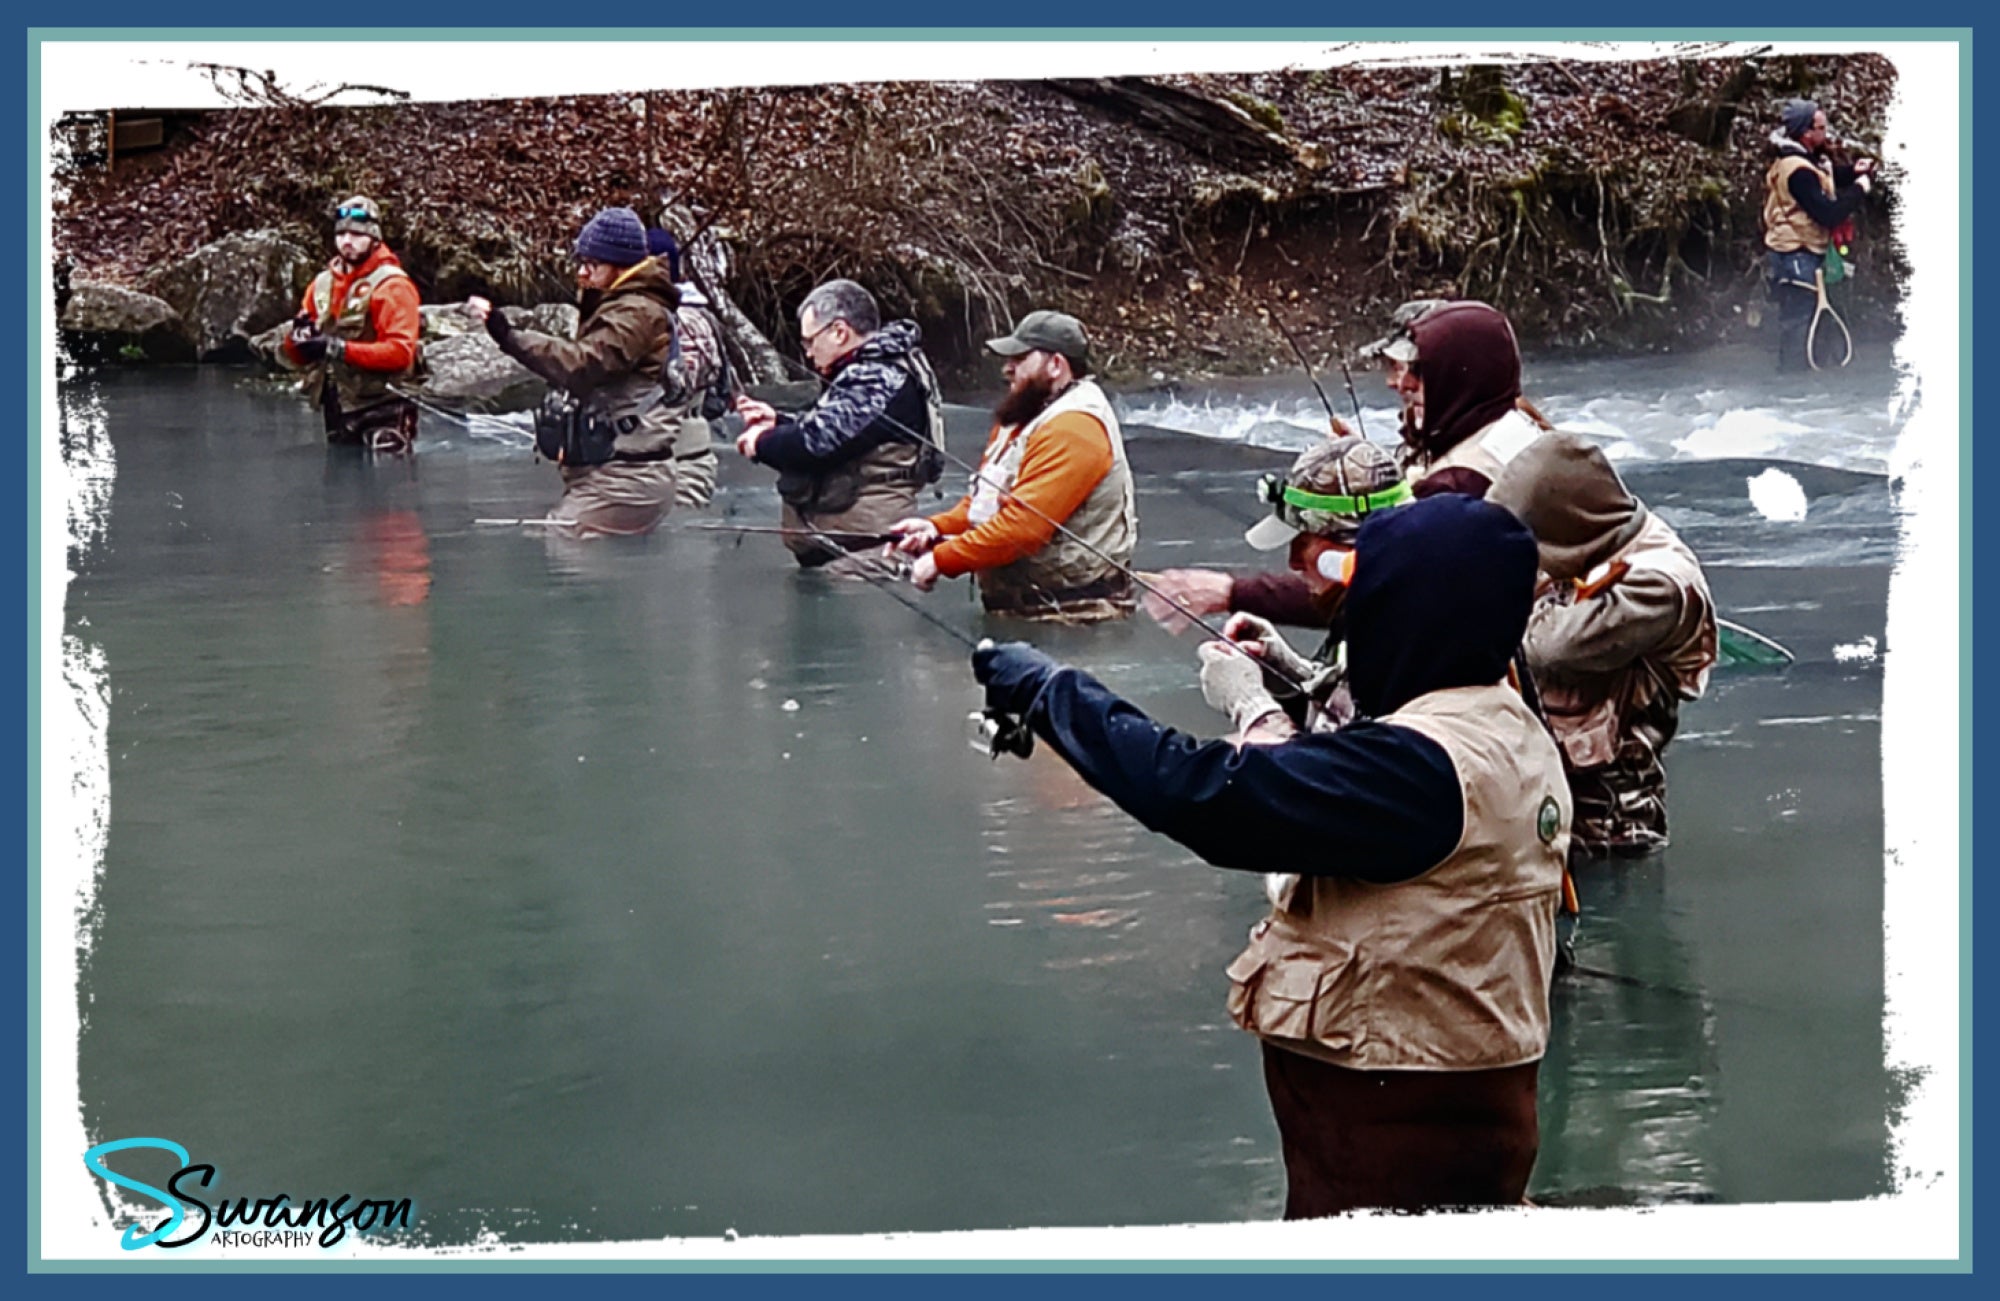 March 1 - Opening Day of Catch 'n Keep trout season at Maramec Spring Park, 2 miles from us.